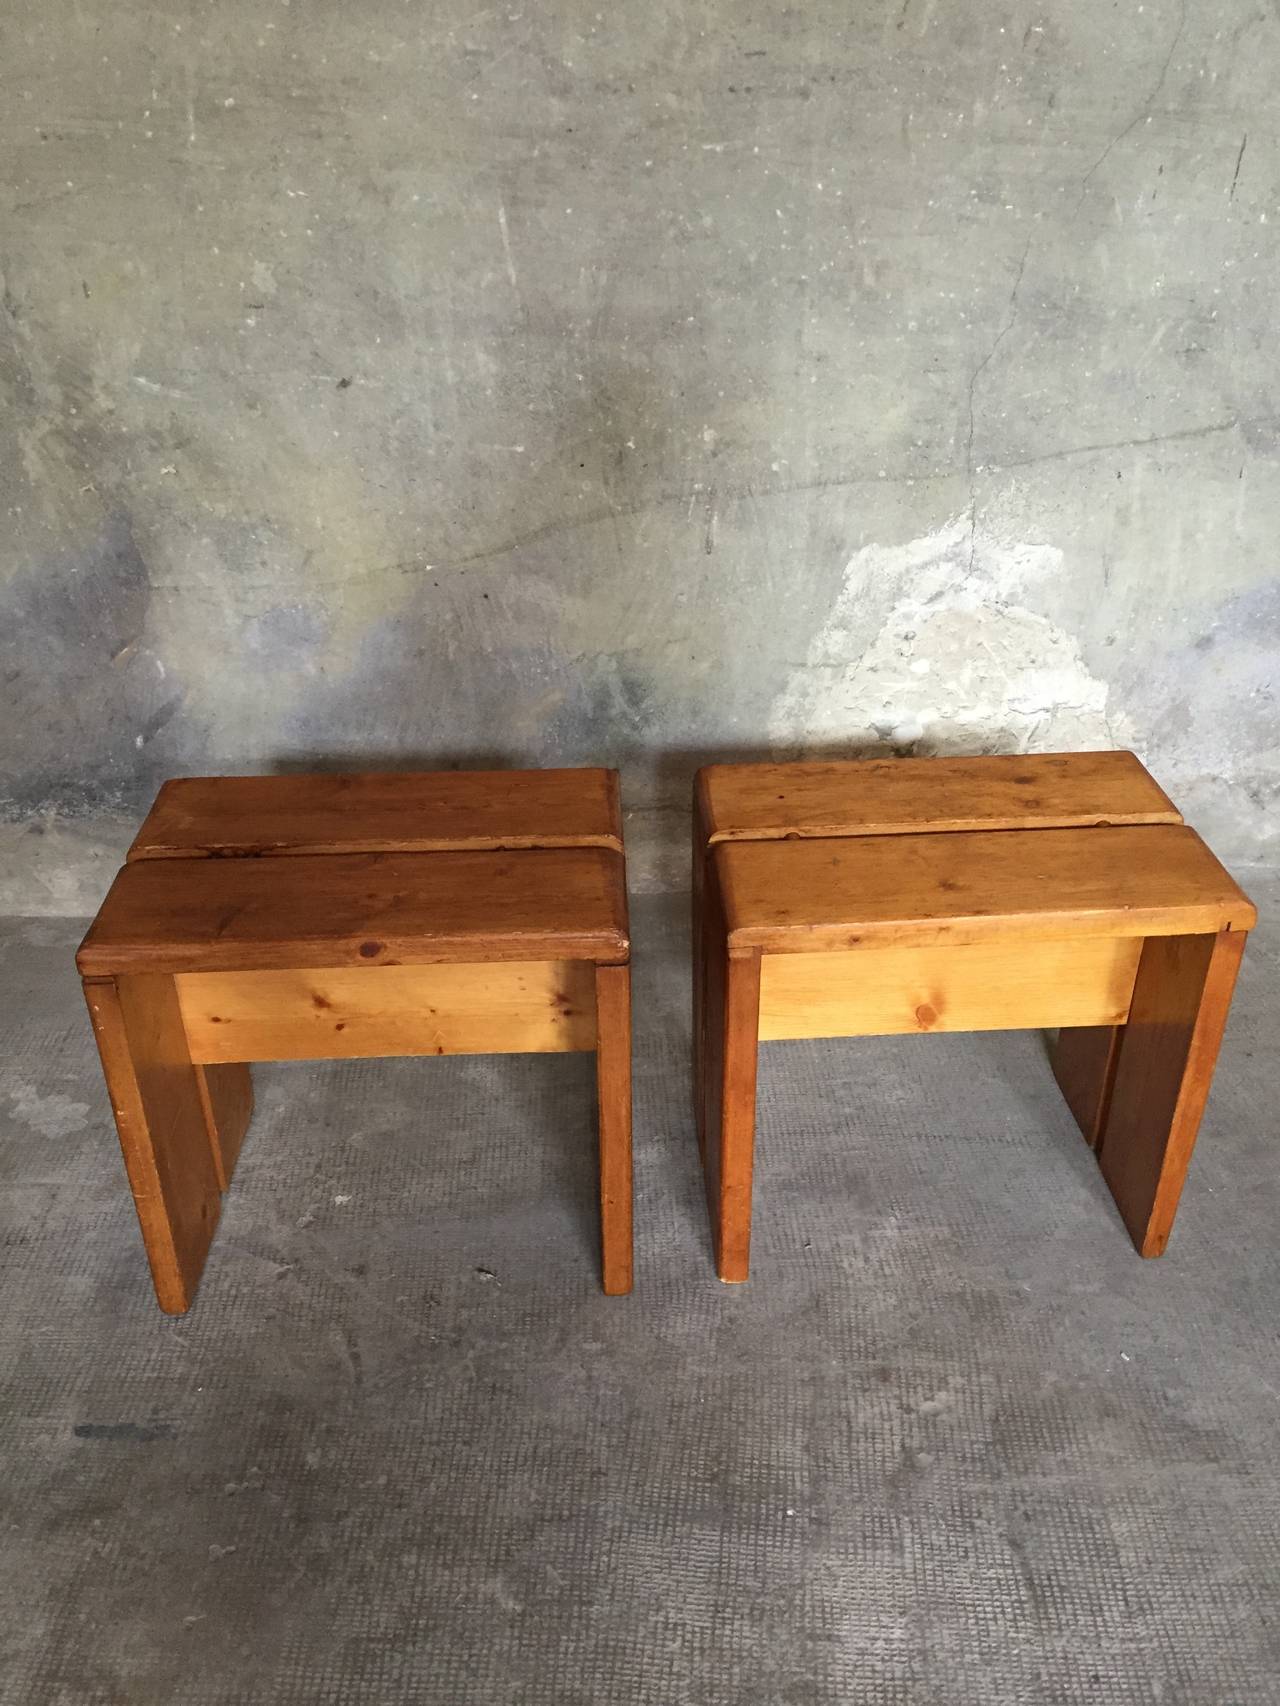 a very good vintage condition for this pair of pinewood stools by Charlotte Perriand for 